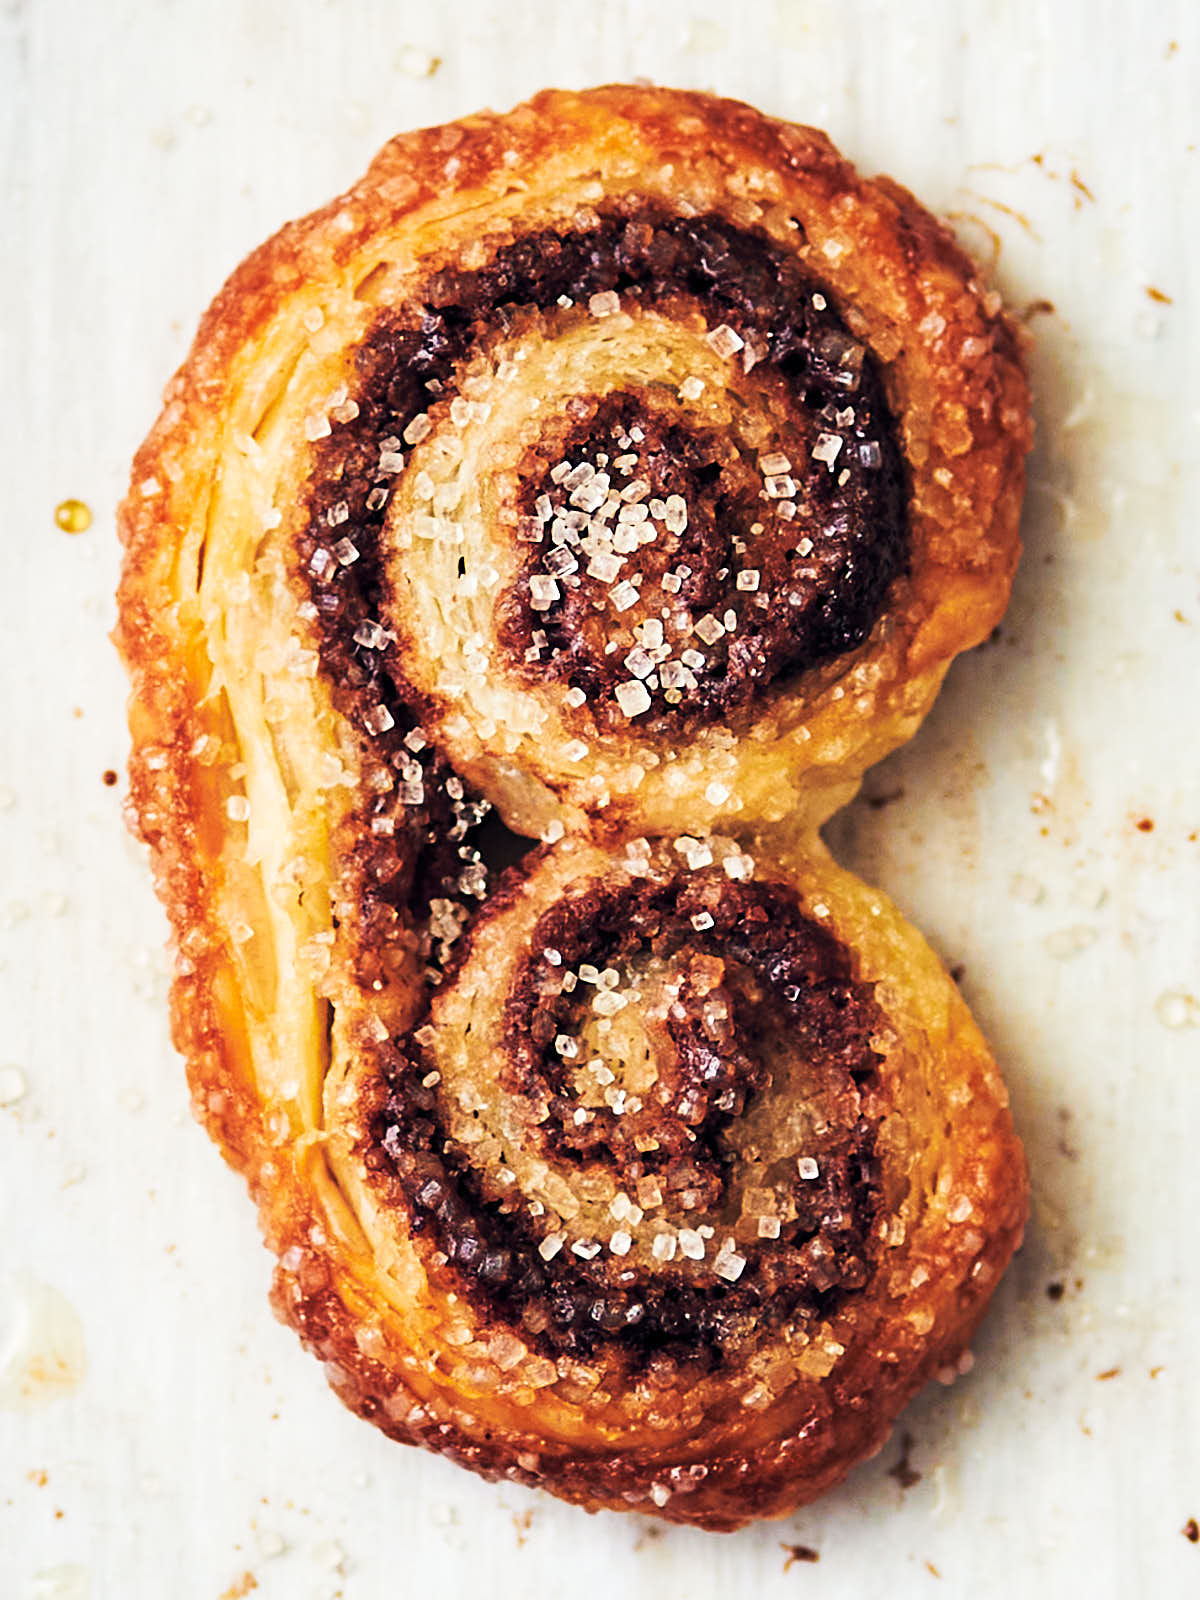 A flaky, golden-brown Nutella Puff Pastry Palmier.